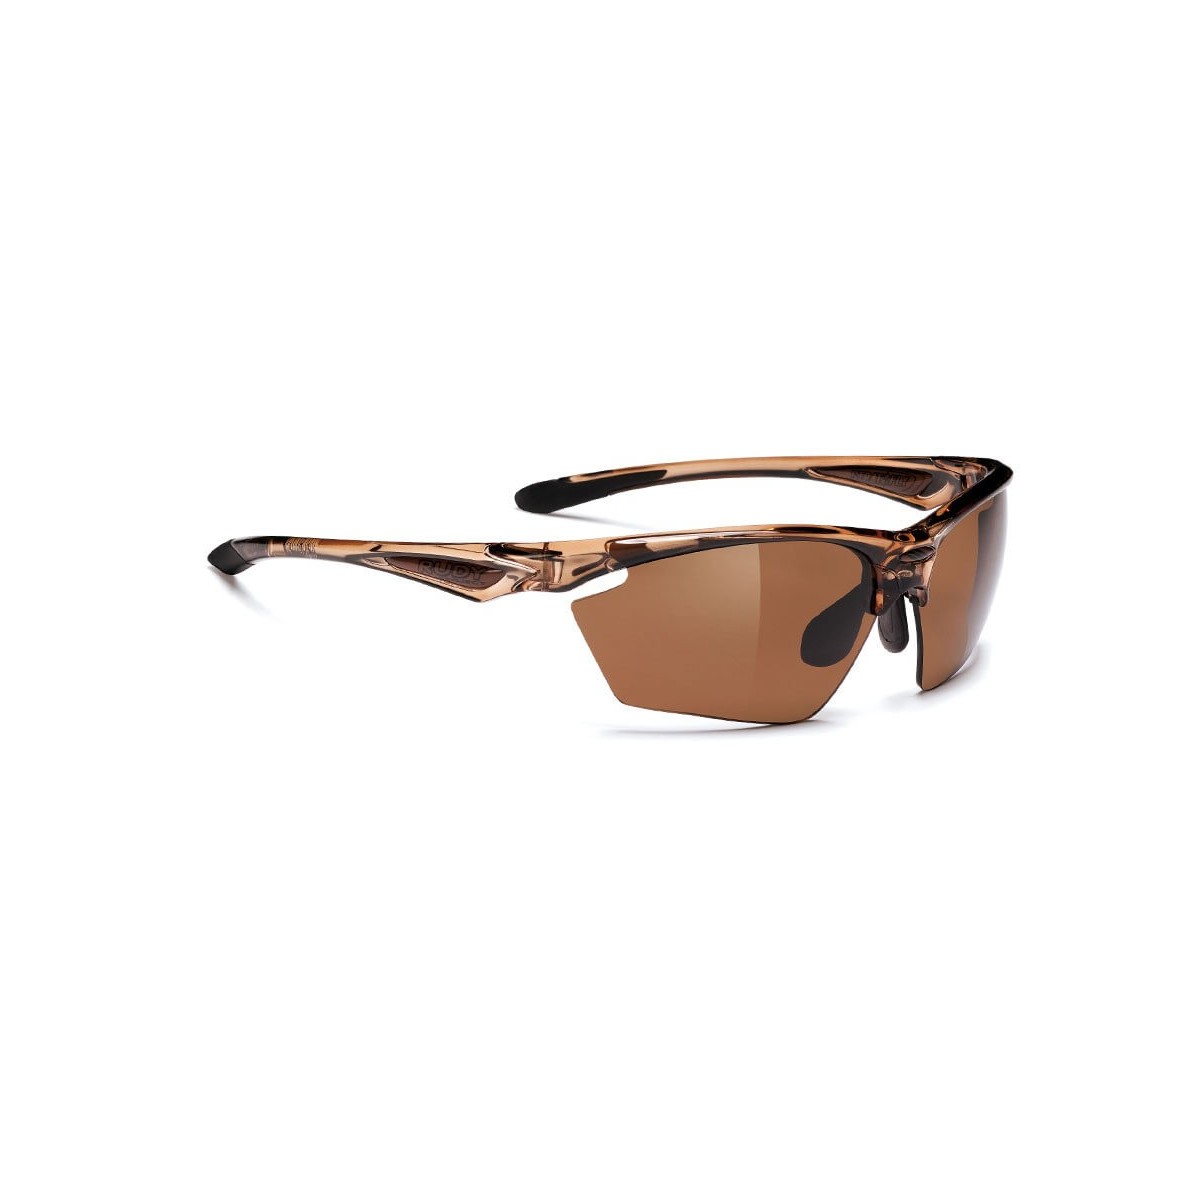 Stratofly RPO Crystal Brown Rudy Project Glasses